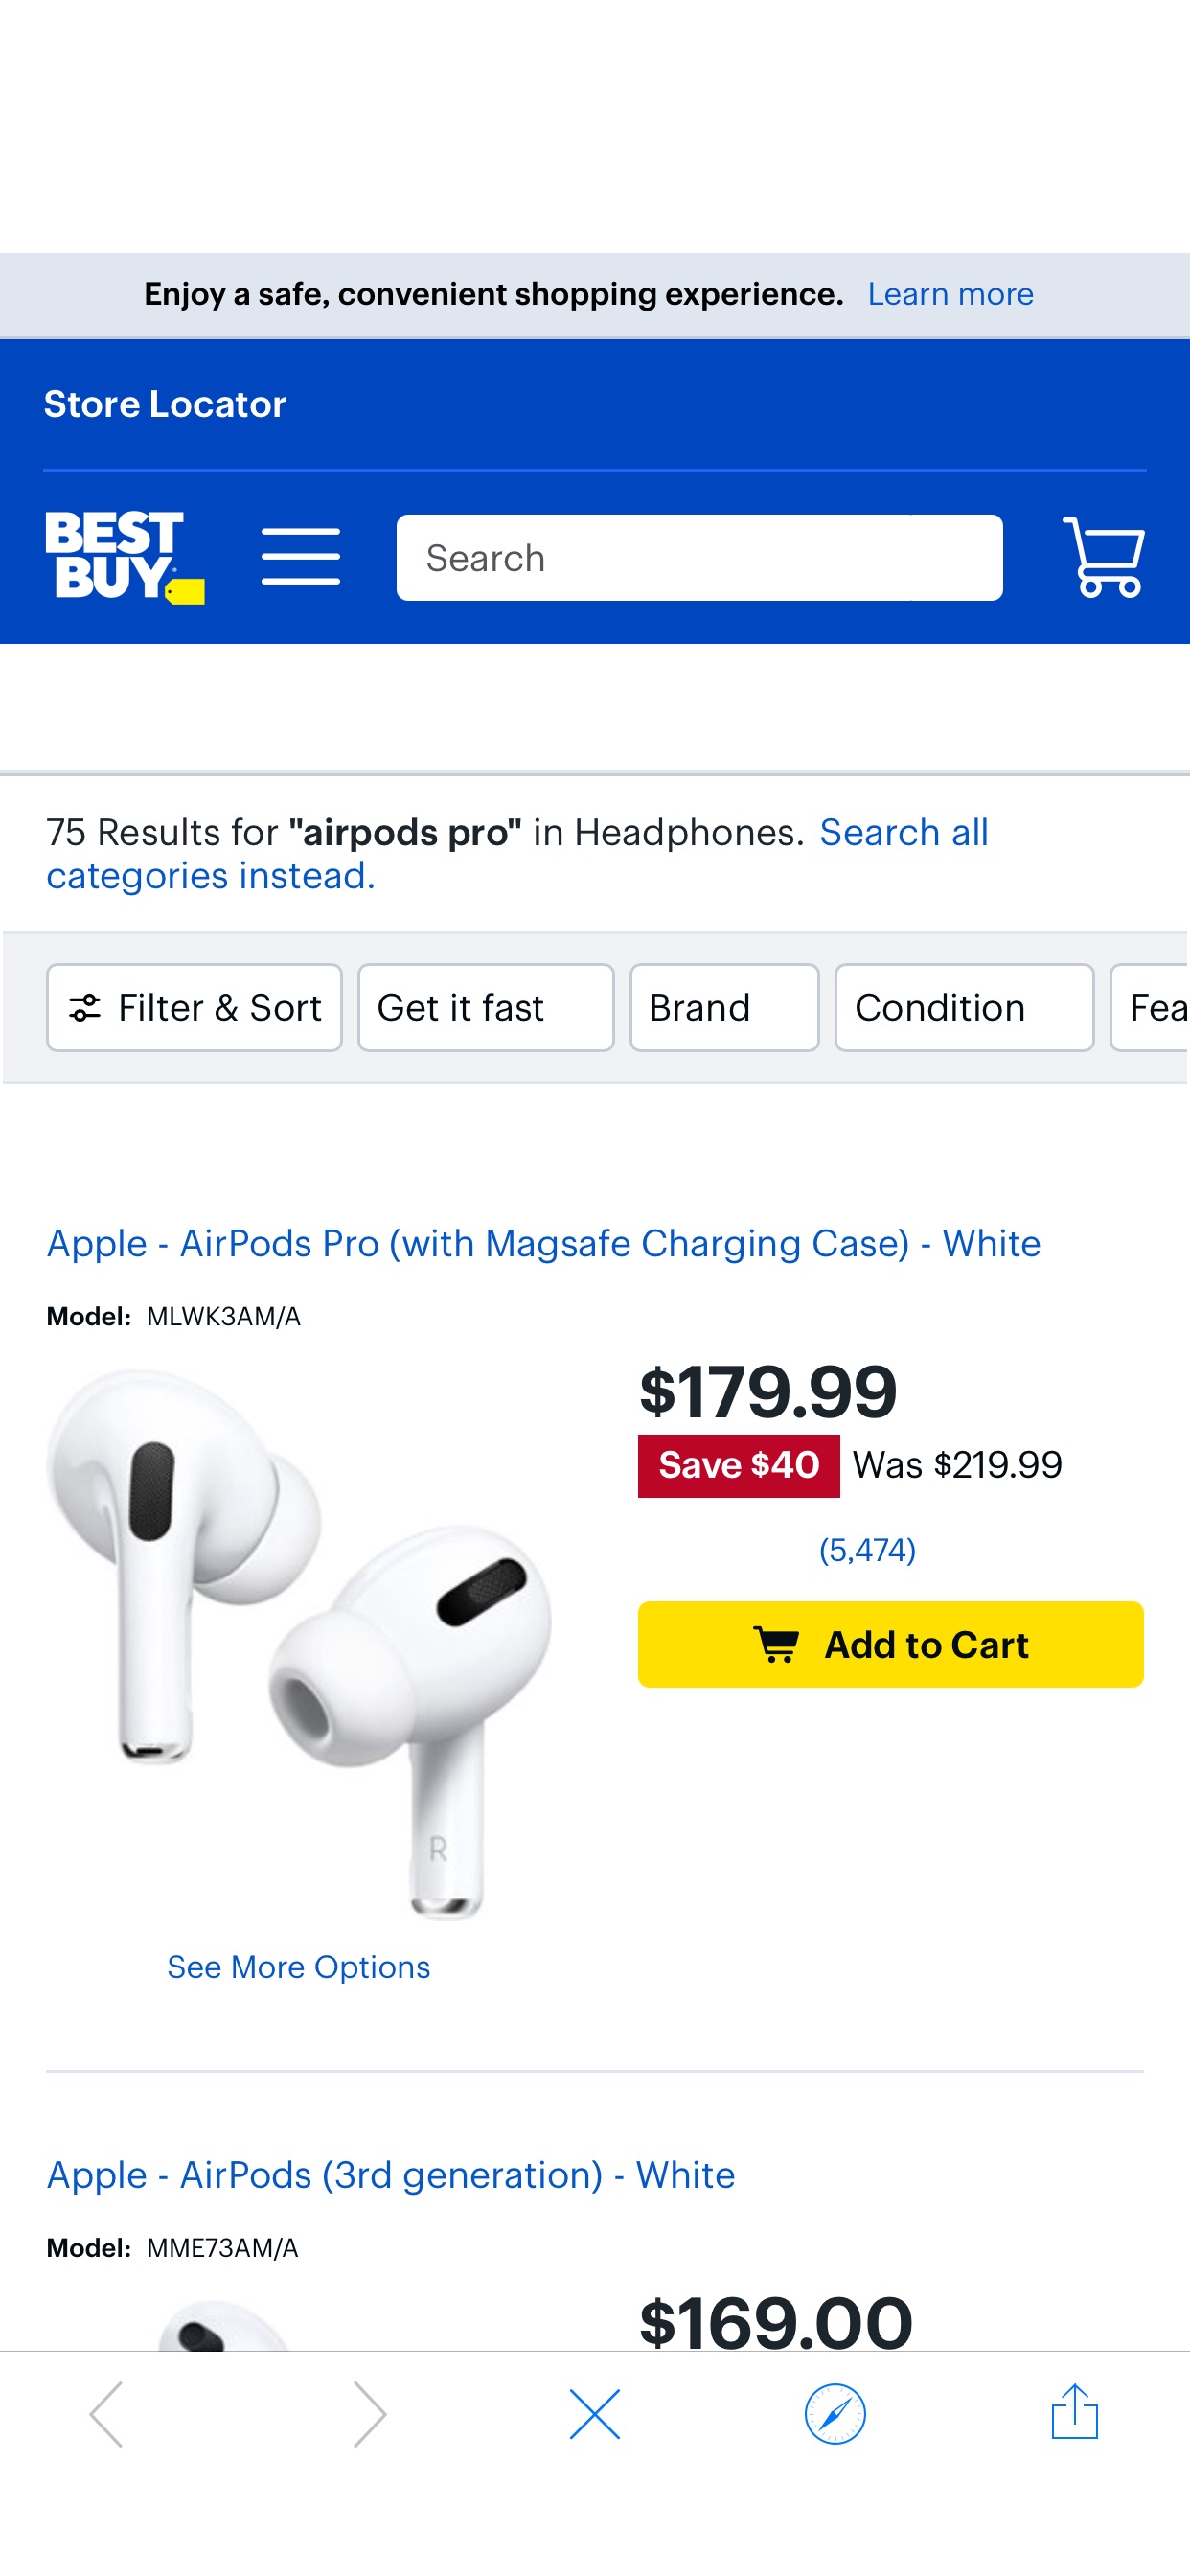 airpods pro - Best Buy AirPod 促销